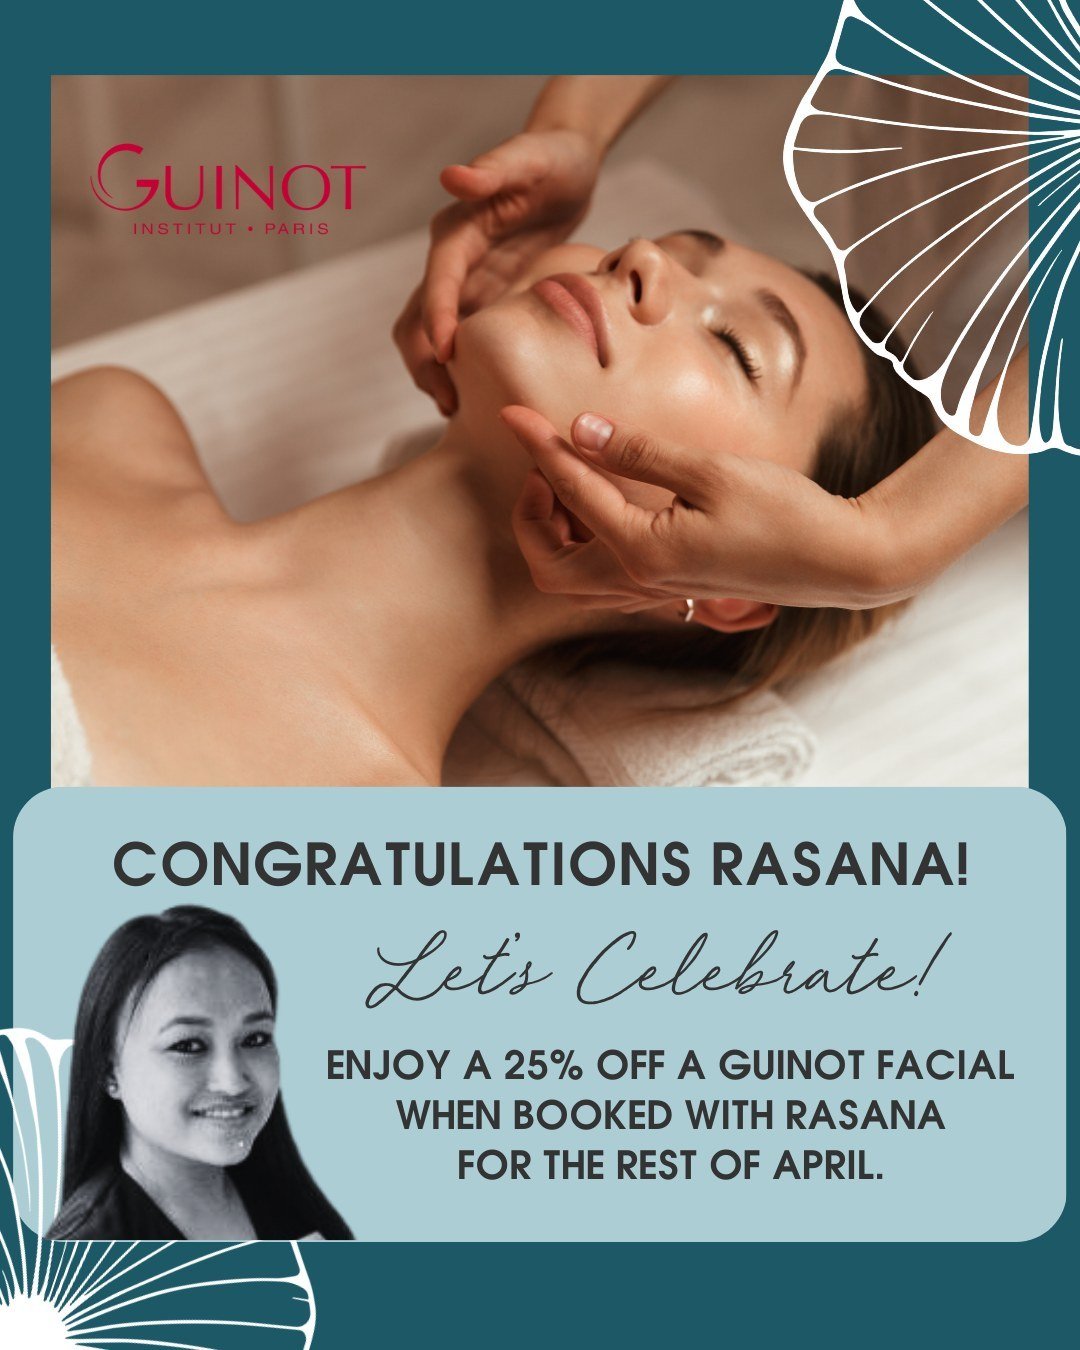 Celebrate with us Rasana completing her Guinot training in Patcham. 👏🎉⁠
⁠
✨With every Guinot facial booked with Rasana in Patcham, you'll receive 25% off. Offer available till April 30. T&amp;C's Apply.⁠
⁠
Book your Guinot Facial with Rasana at Pat